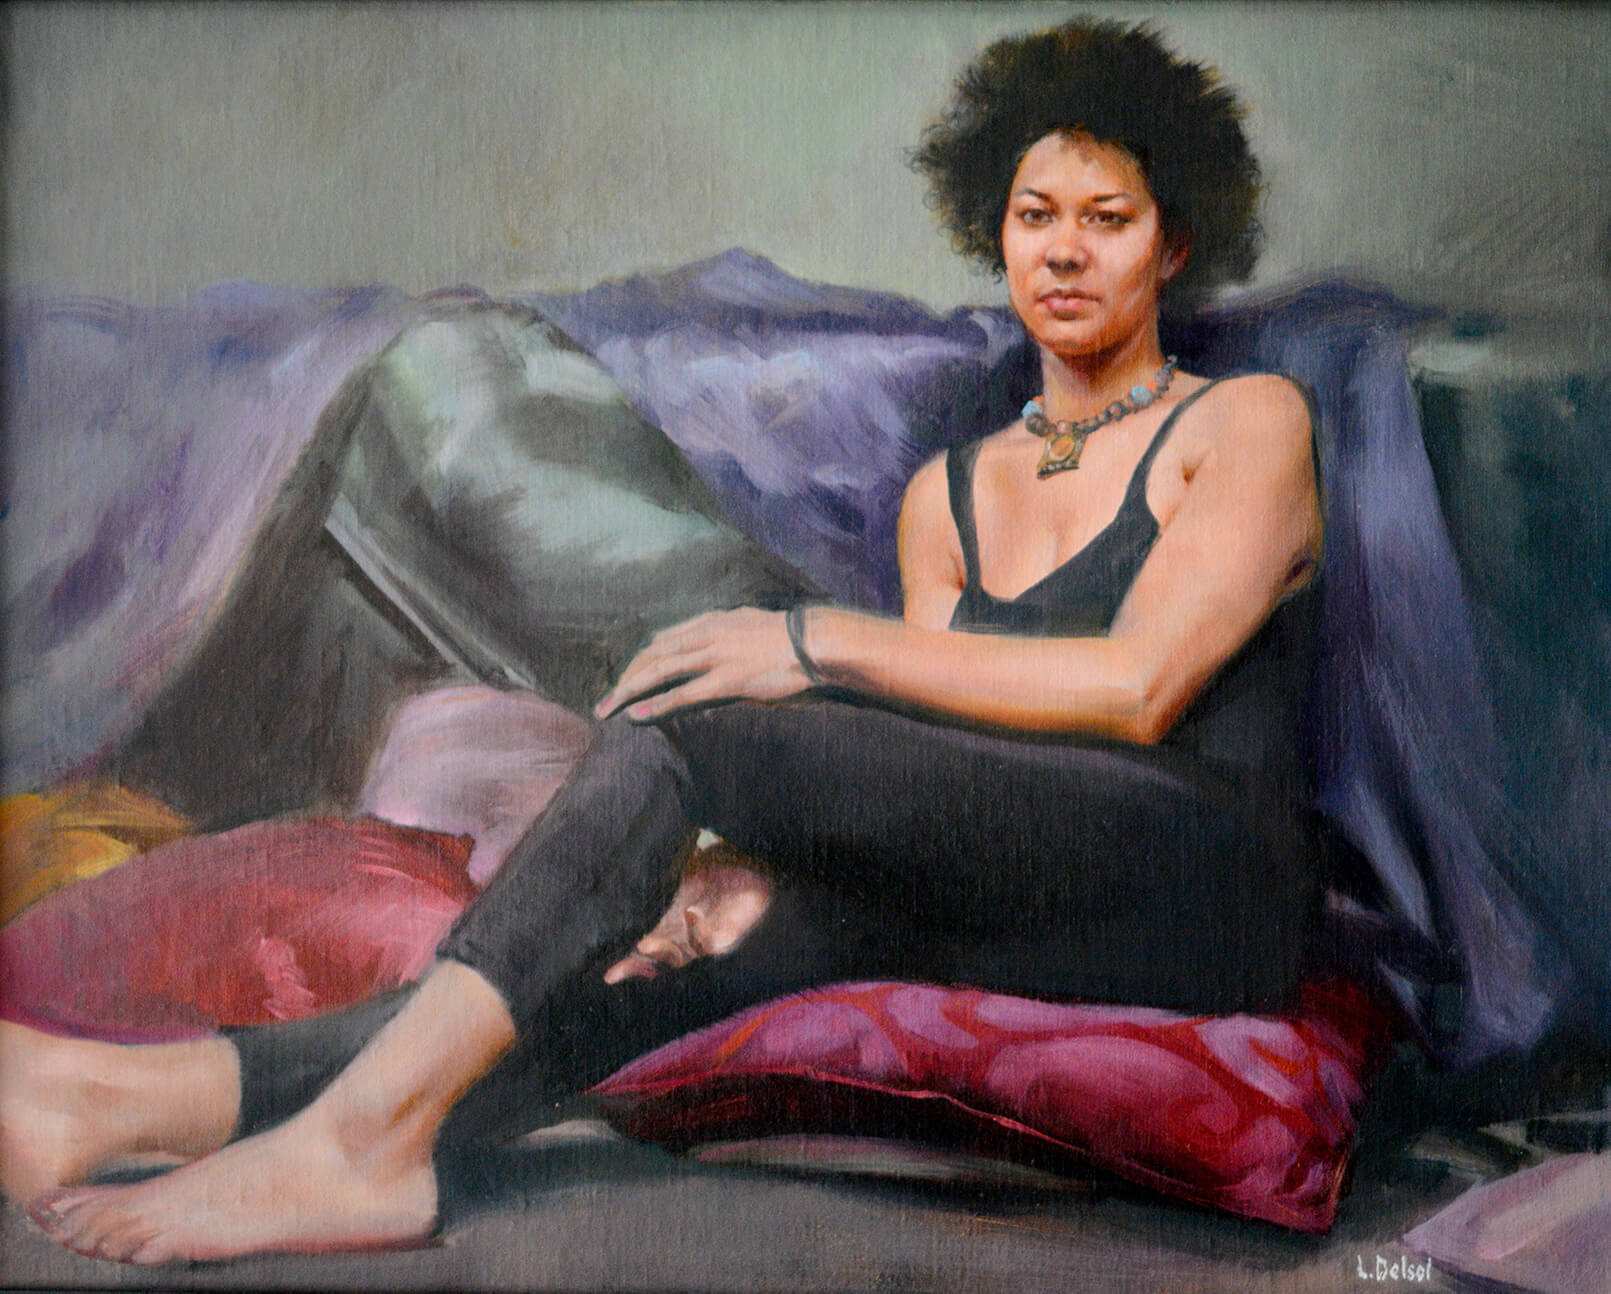 Realistic full figure oil portrait of a woman wearing black legging and sleeveless top sitting upon plum colored cushions gazing at us